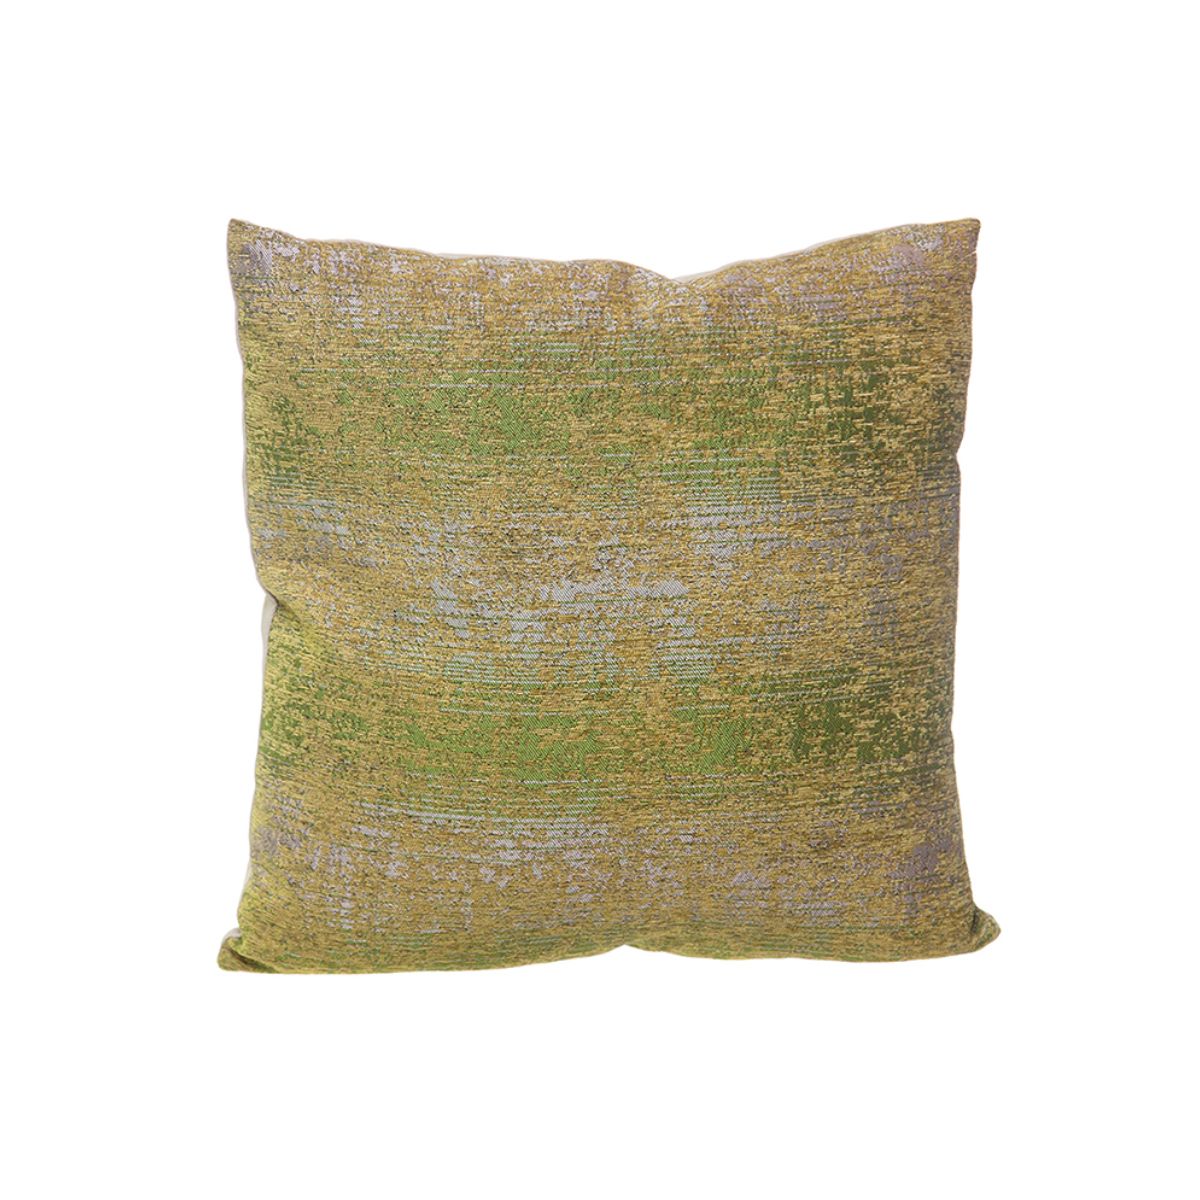 Pillow with Earth Tones